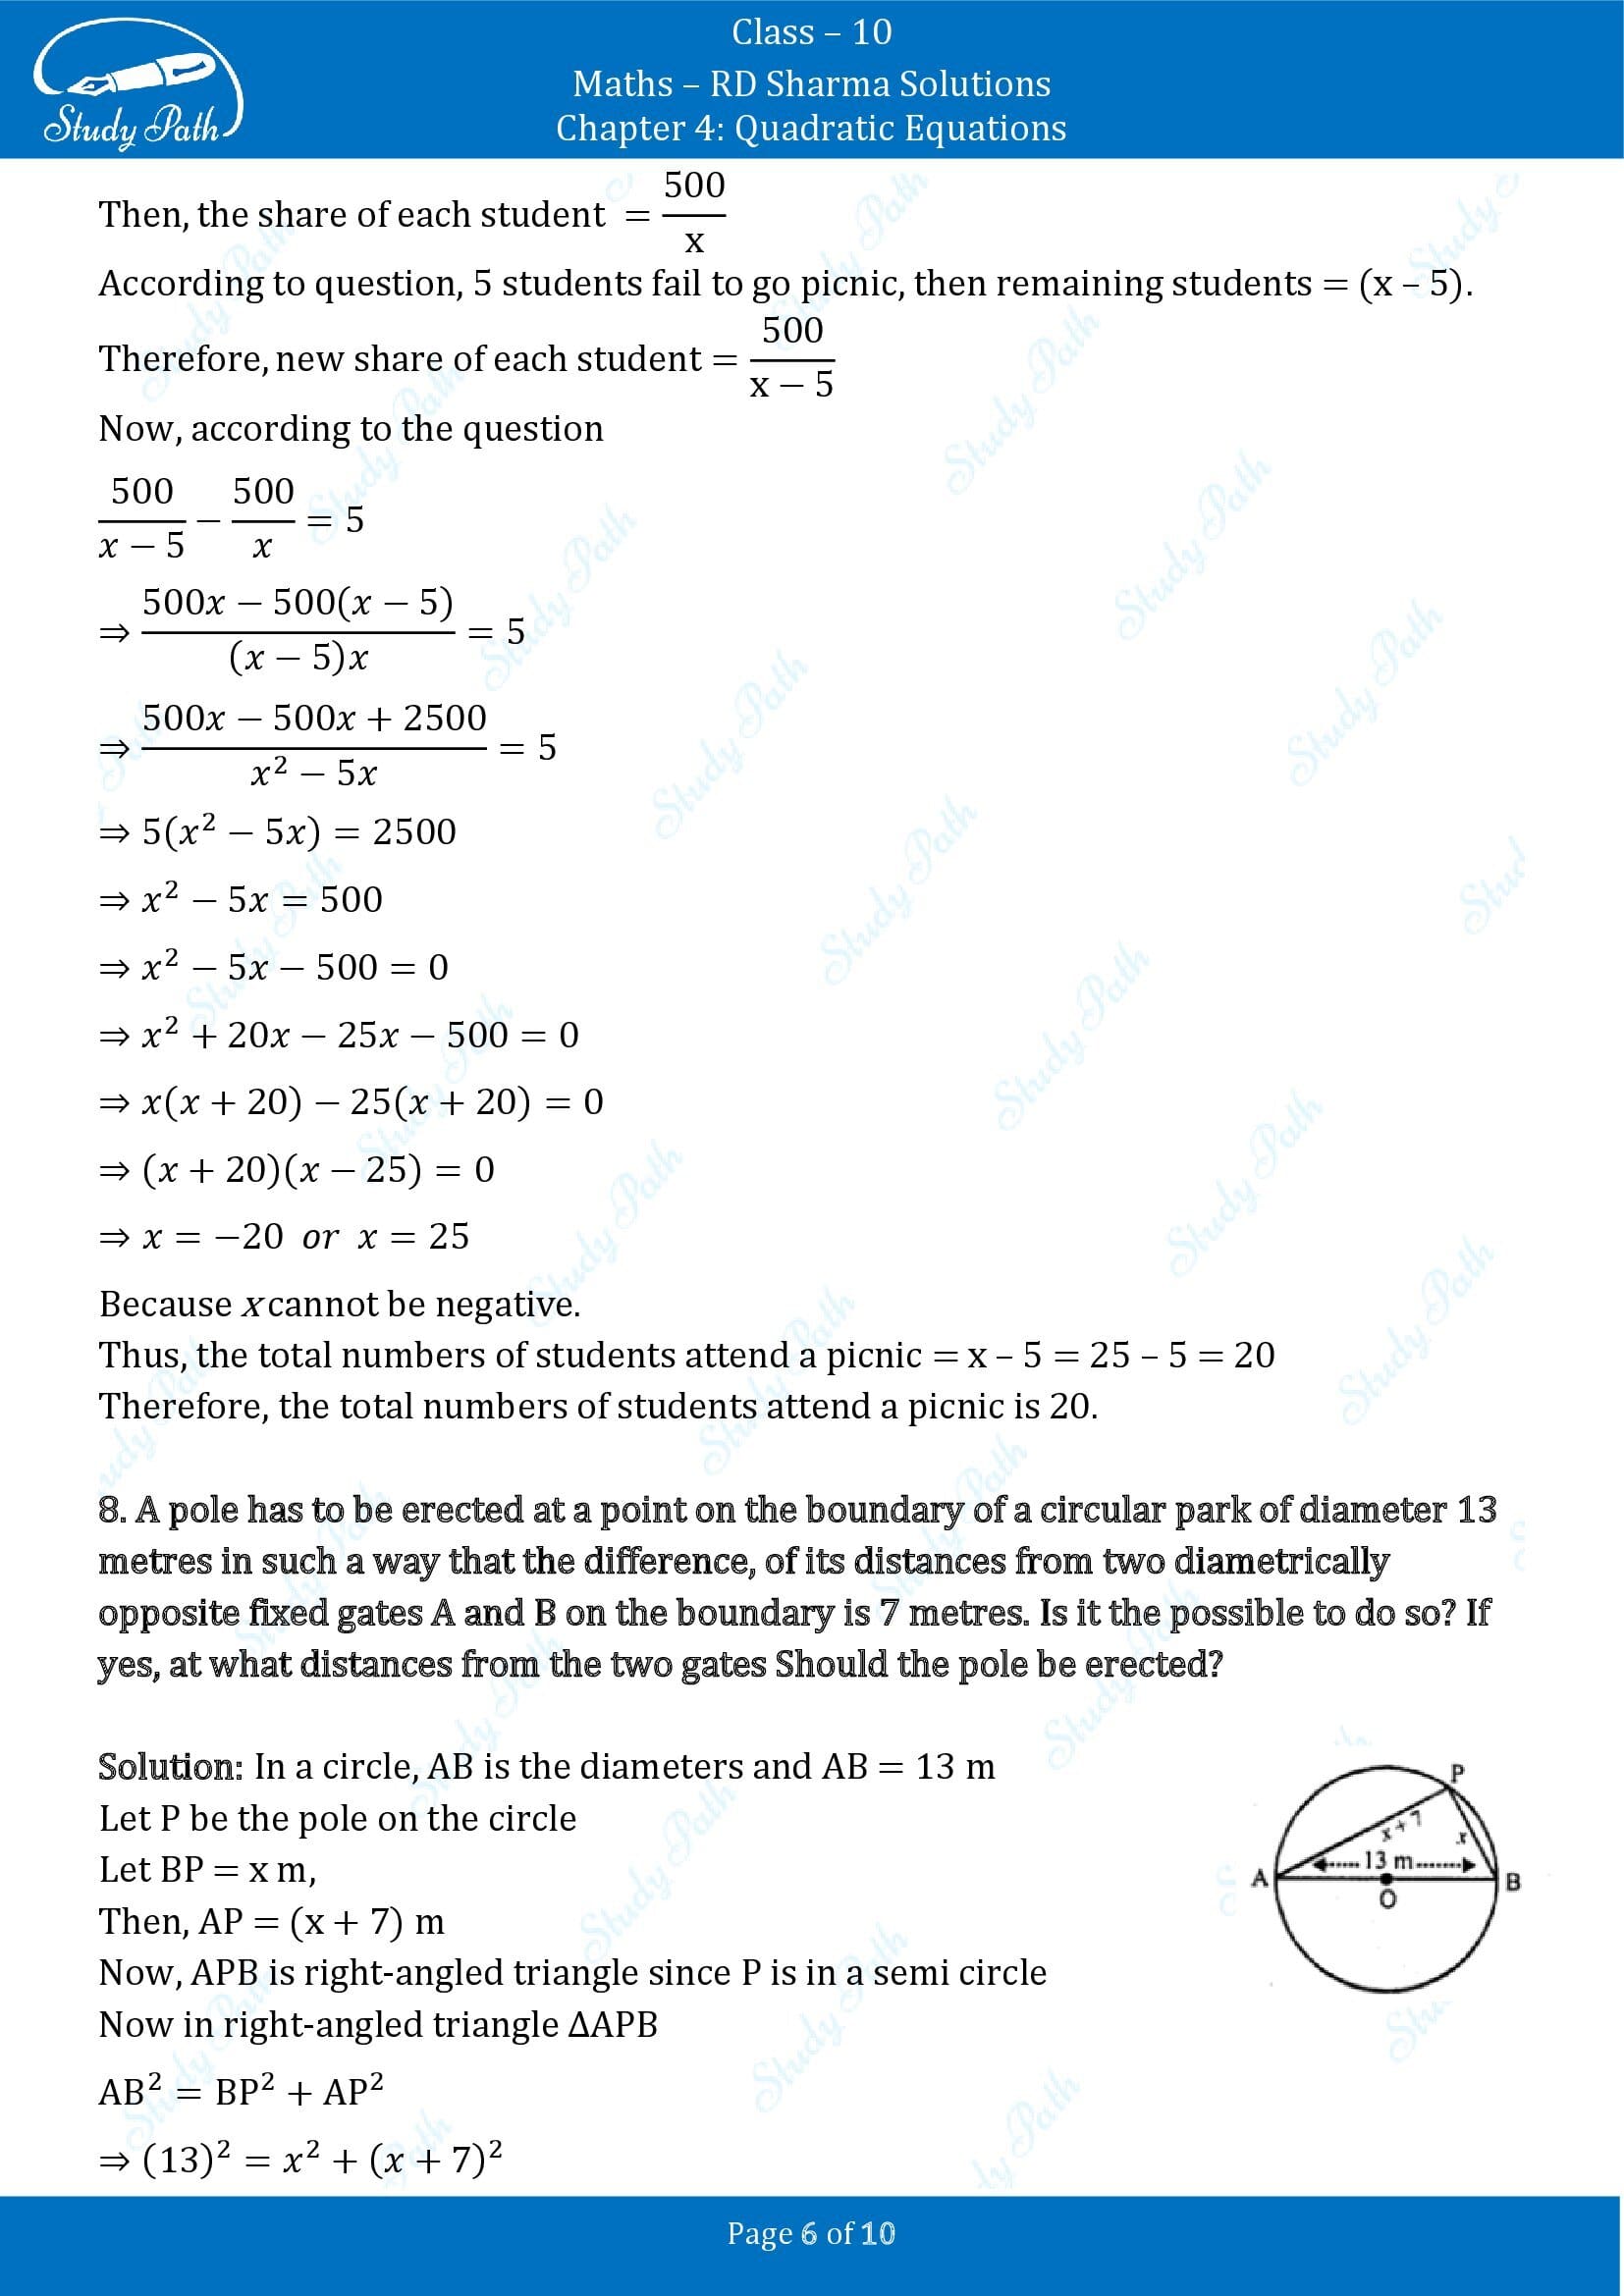 RD Sharma Solutions Class 10 Chapter 4 Quadratic Equations Exercise 4.13 00006